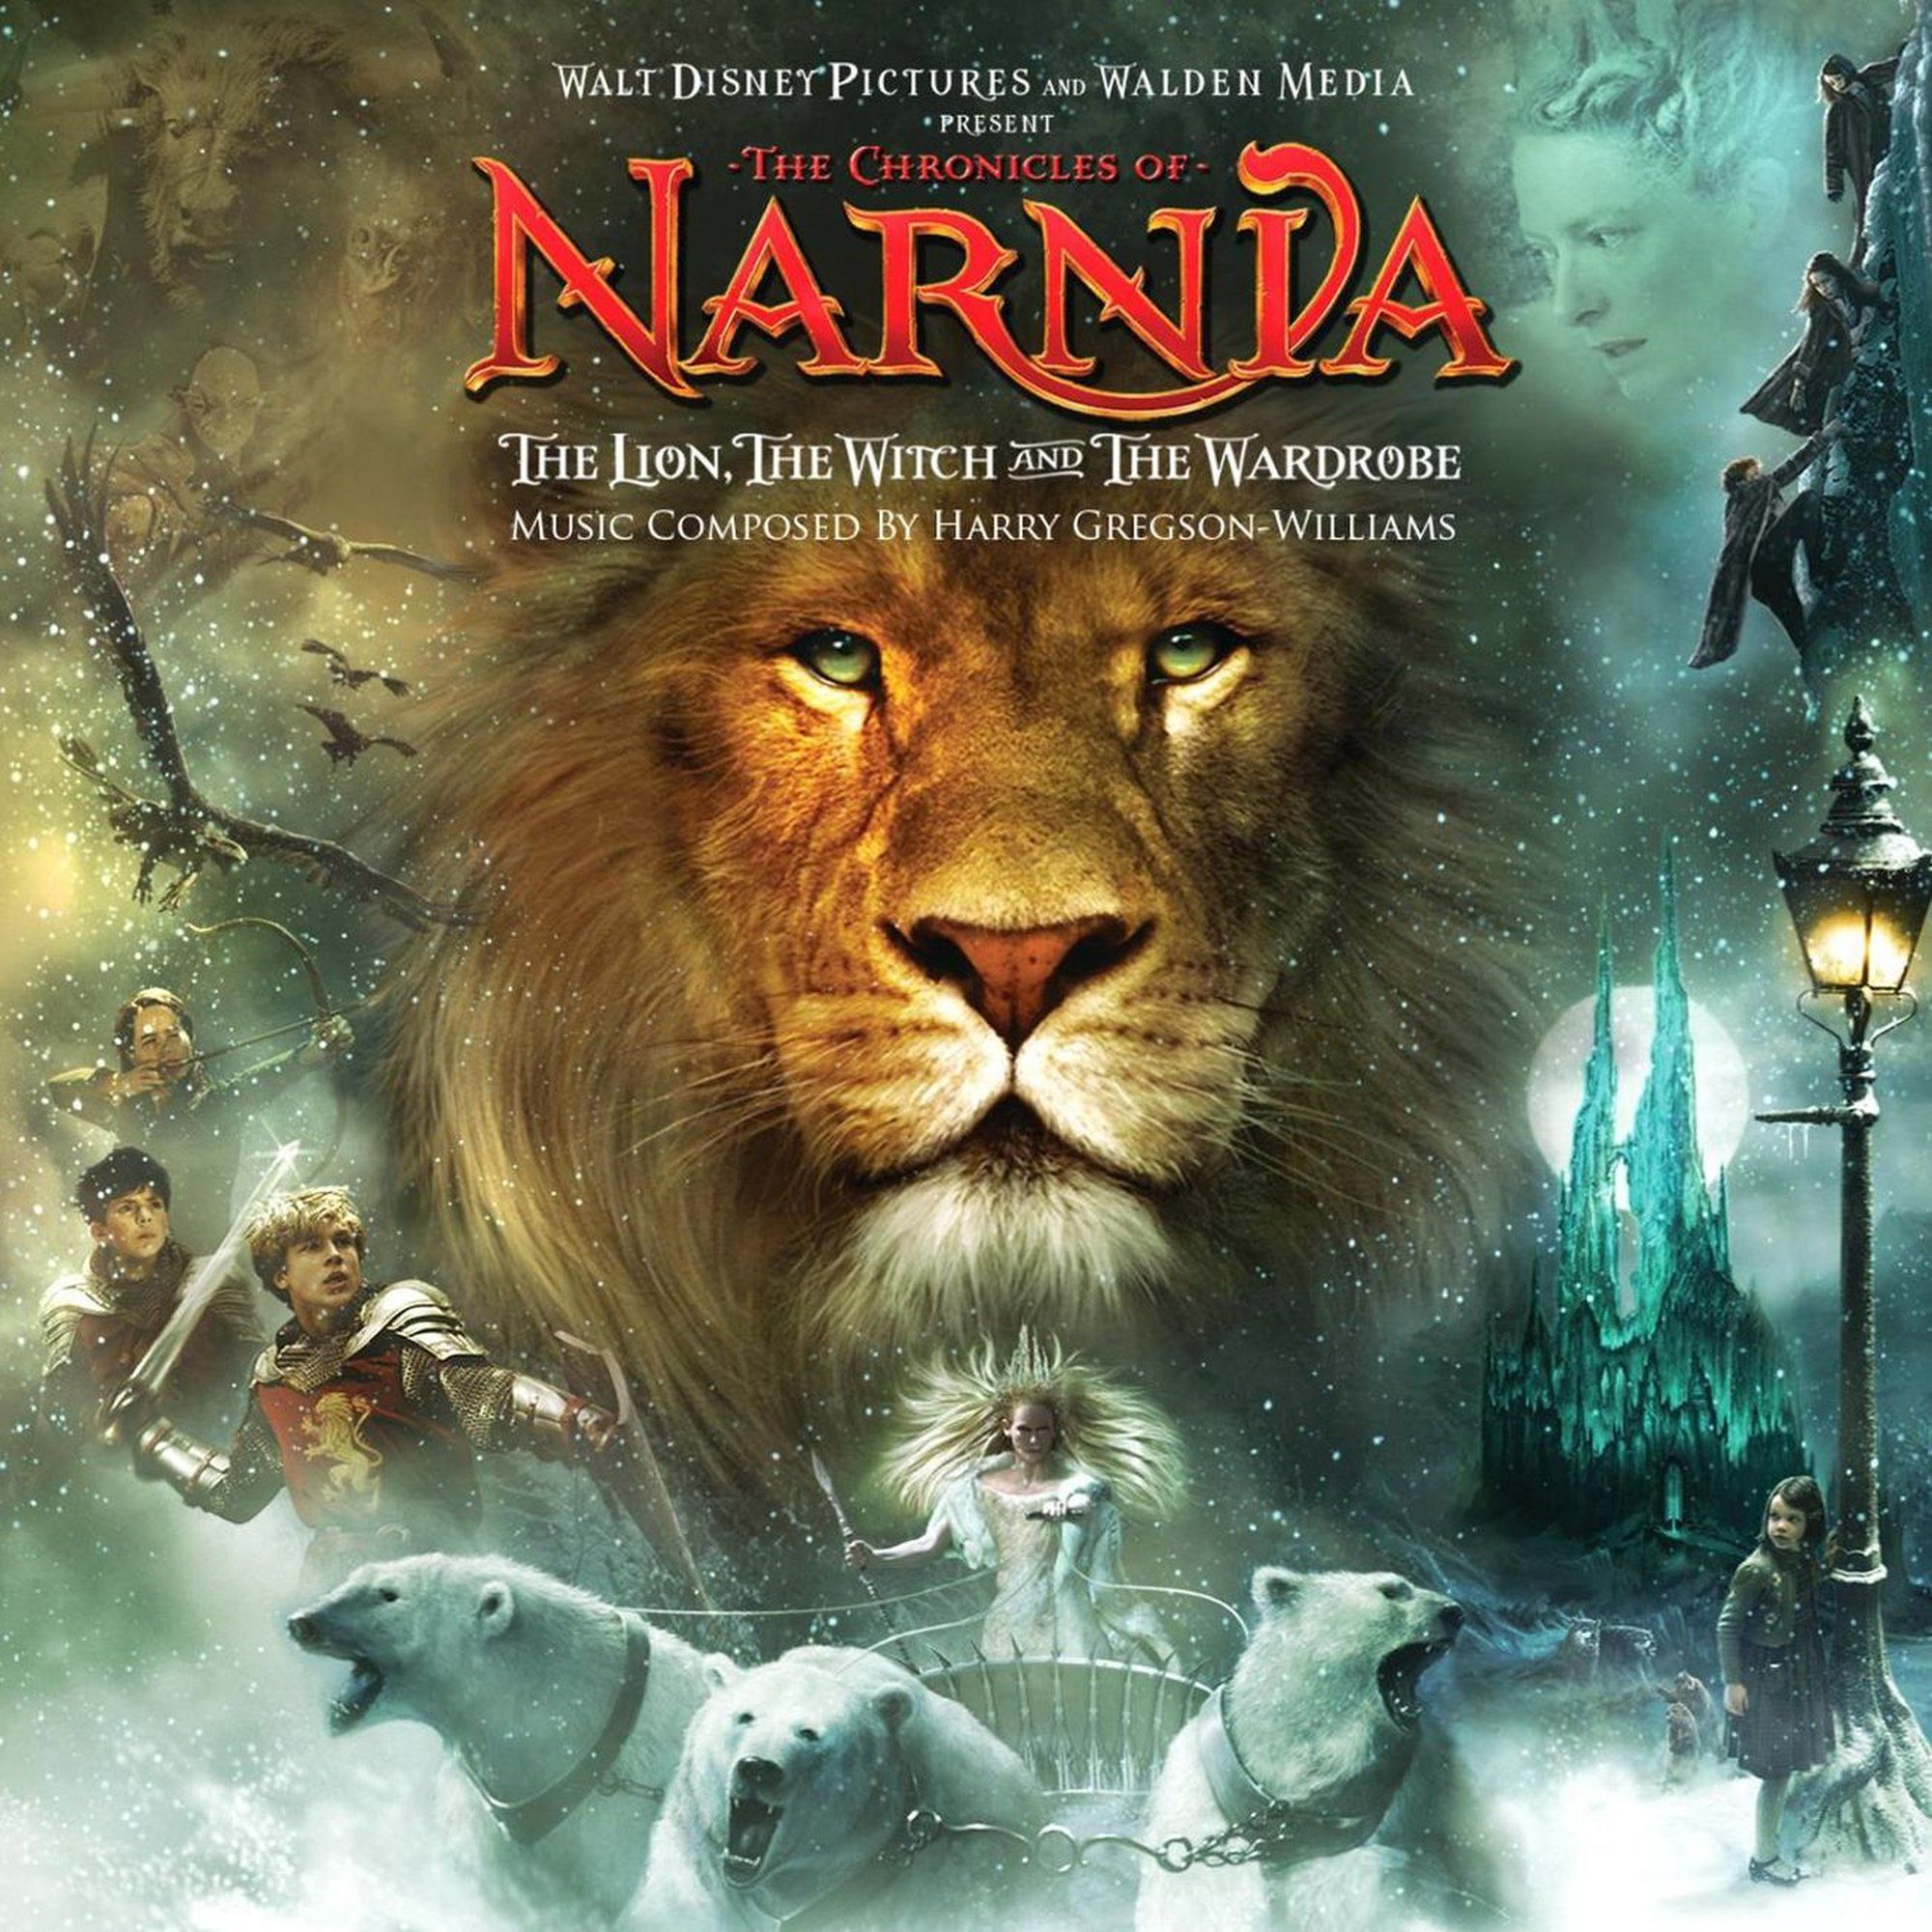 Watch The Chronicles of Narnia: Prince Caspian Full Movie